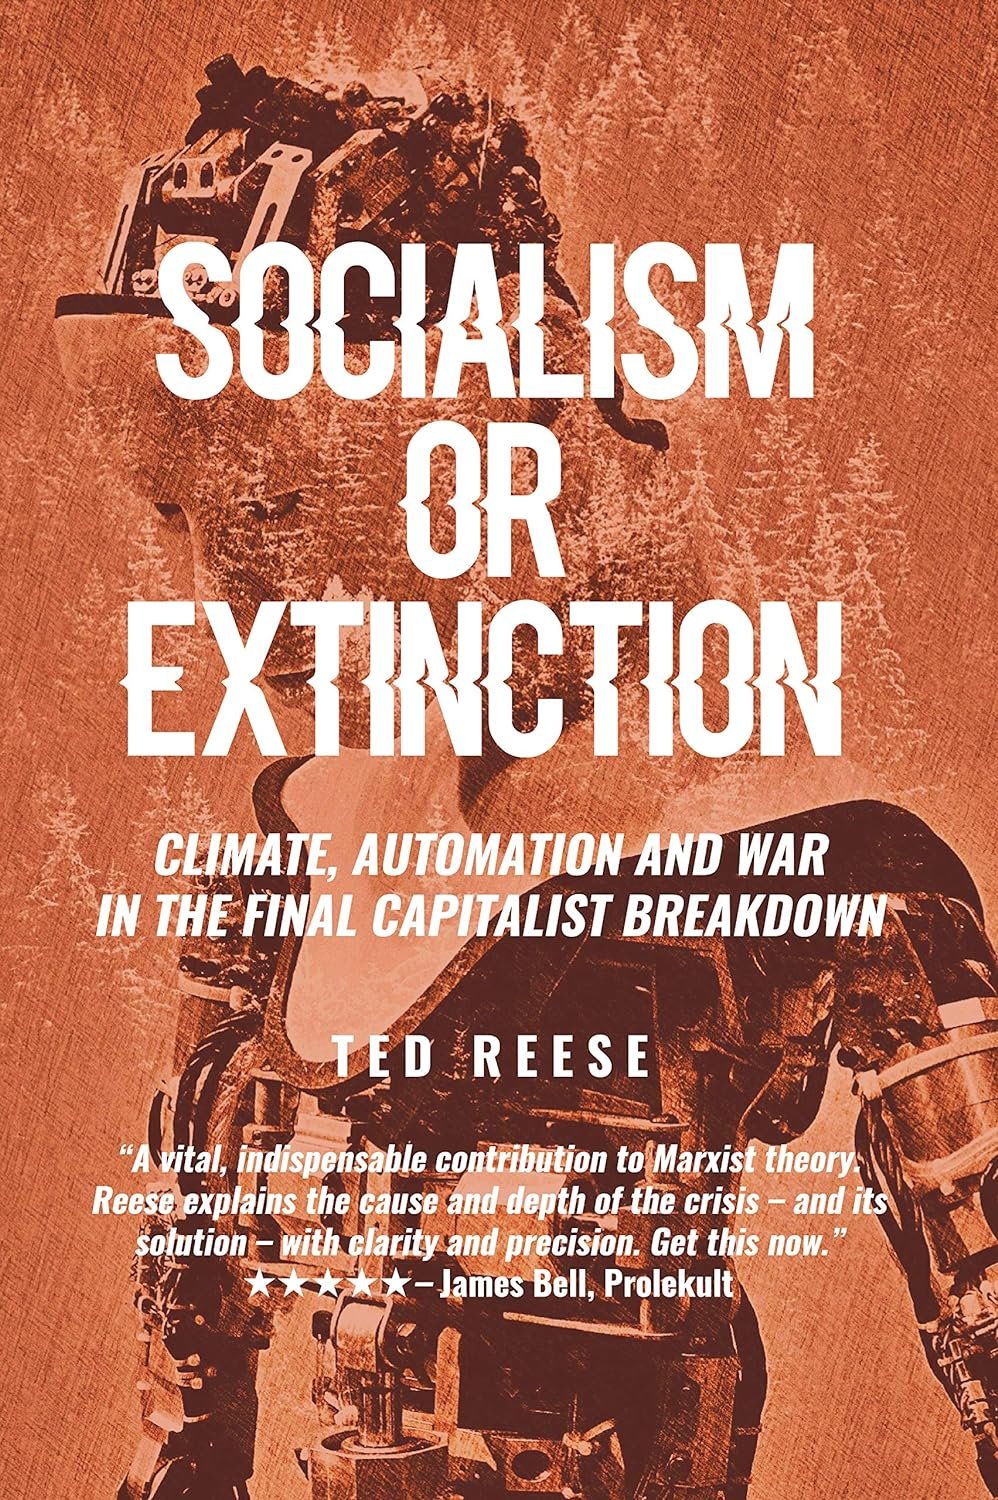 Socialism or Extinction: Climate, Automation and War in the Final Capitalist Breakdown